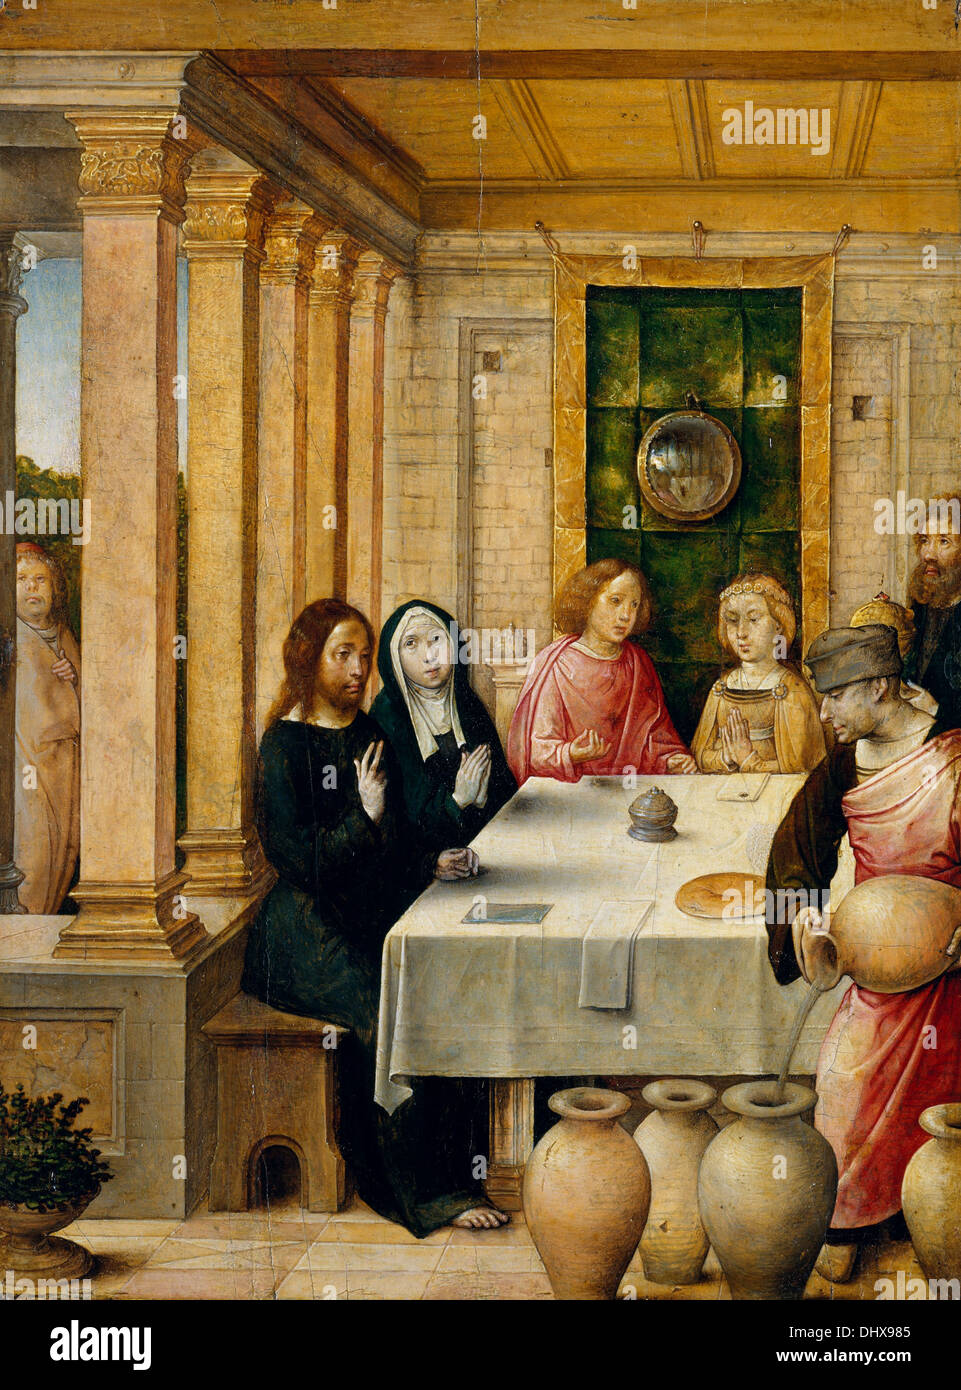 The Marriage Feast at Cana - by Juan de Flandes, 1504 Stock Photo